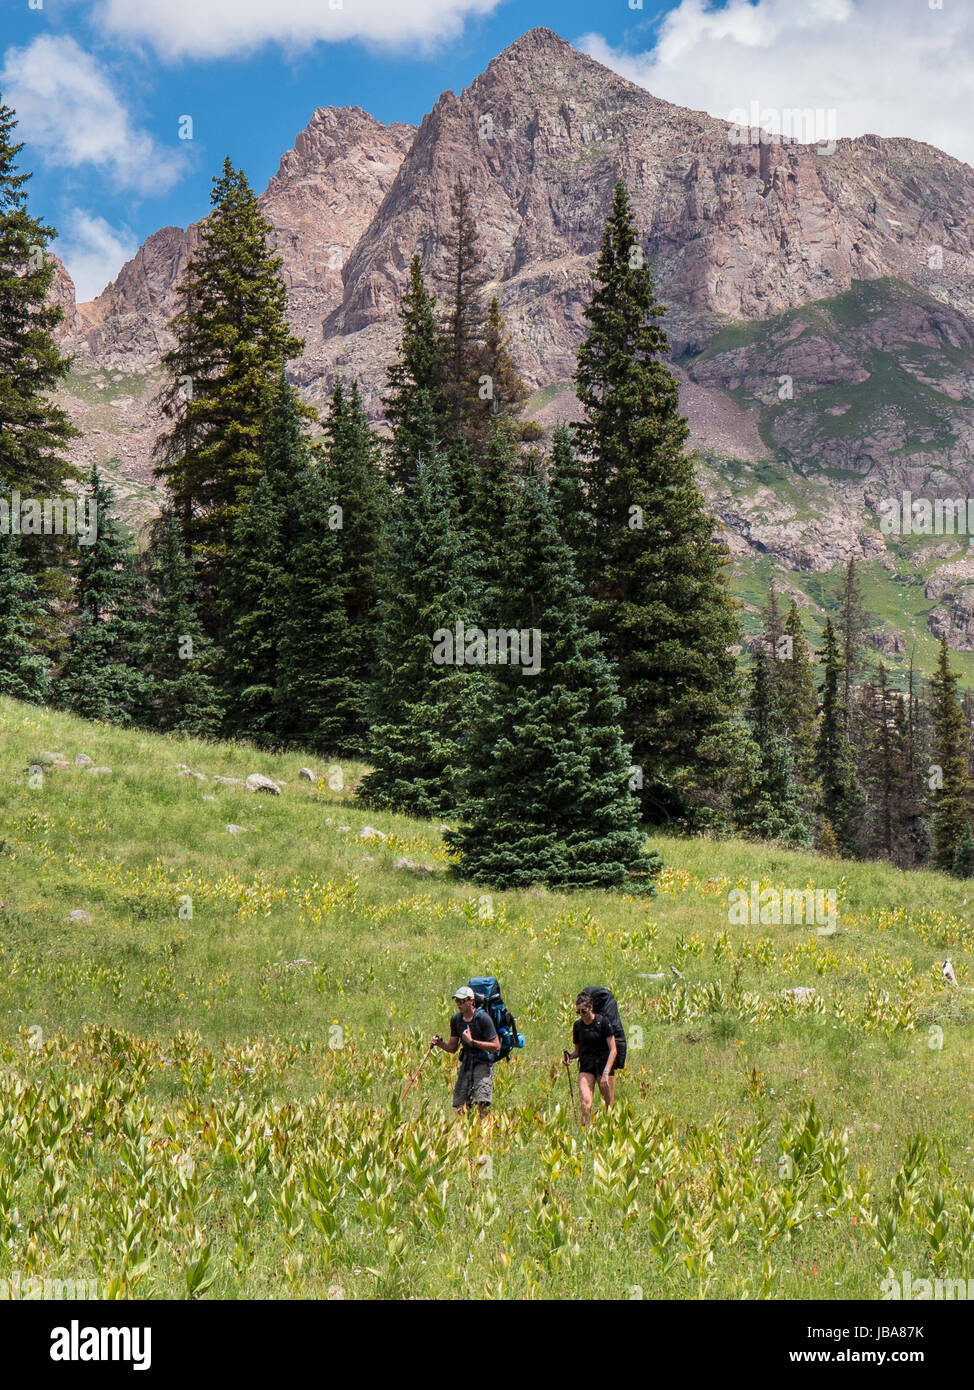 Backpackers on the Needle Creek Trail, Chicago Basin, Weminuche Wilderness Area, San Juan National Forest between Durango and Silverton, Colorado. Stock Photo